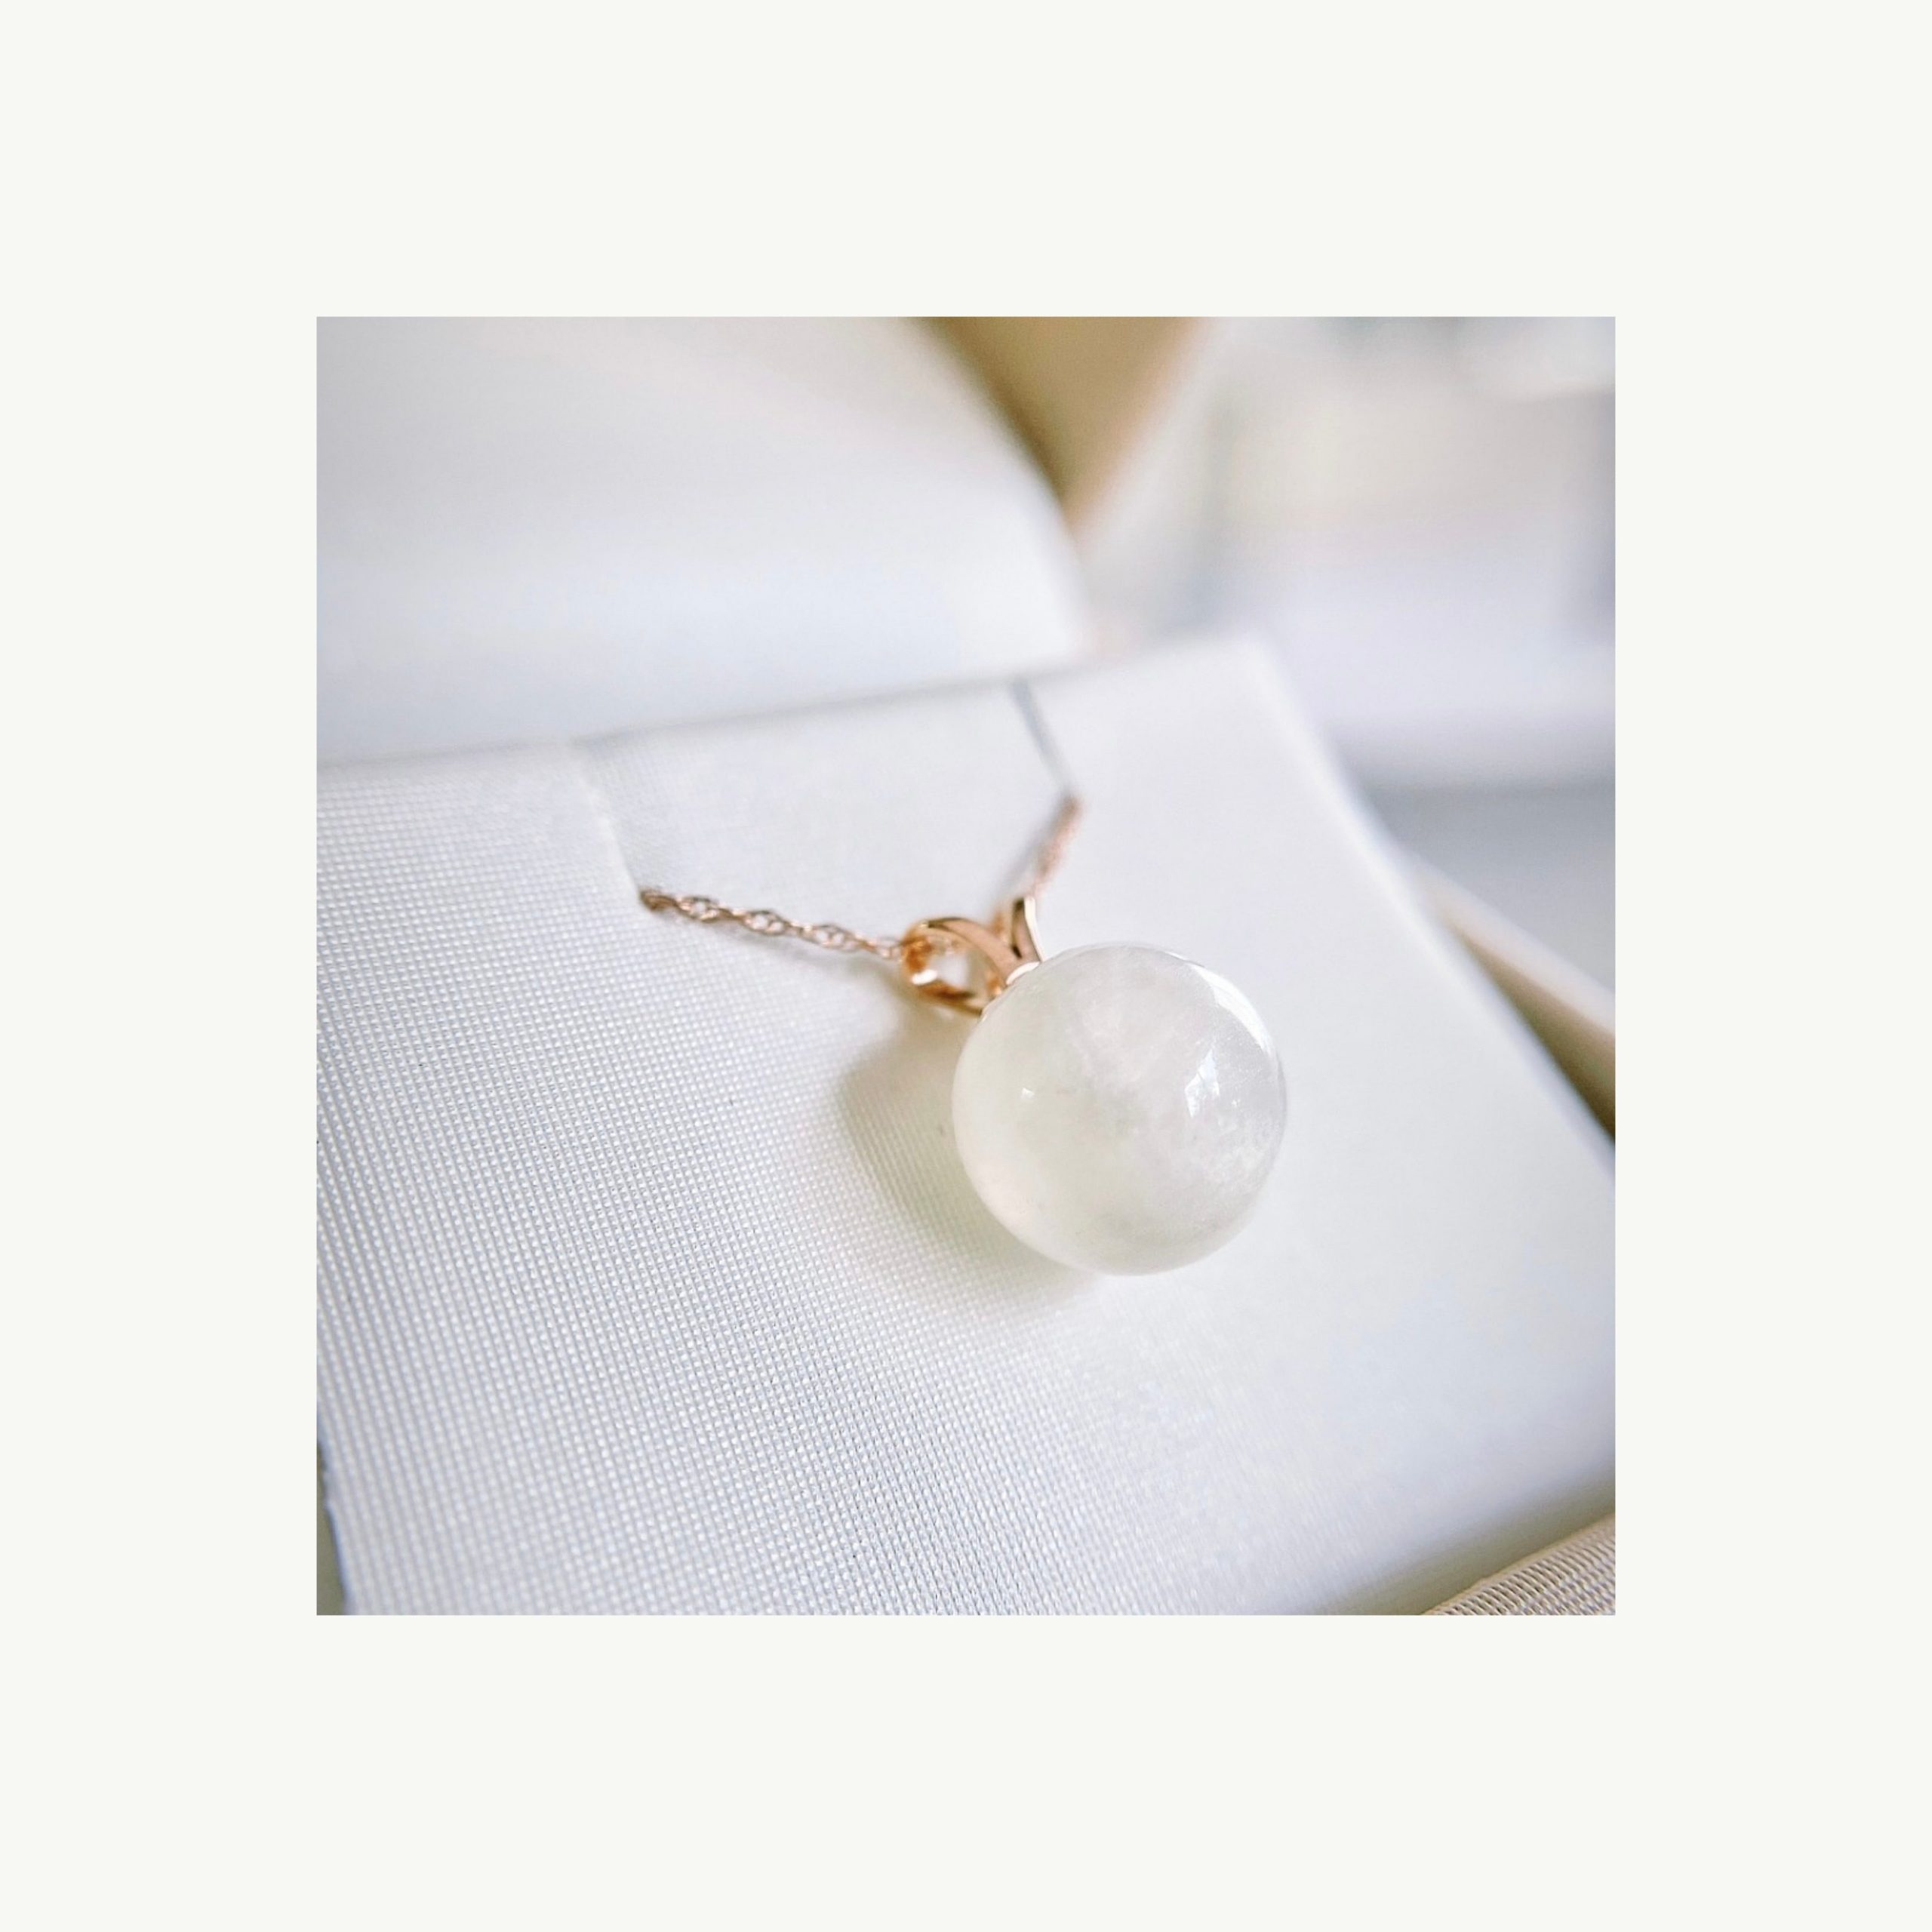 Eternal love pendant made with Breastmilk and Pearl colour